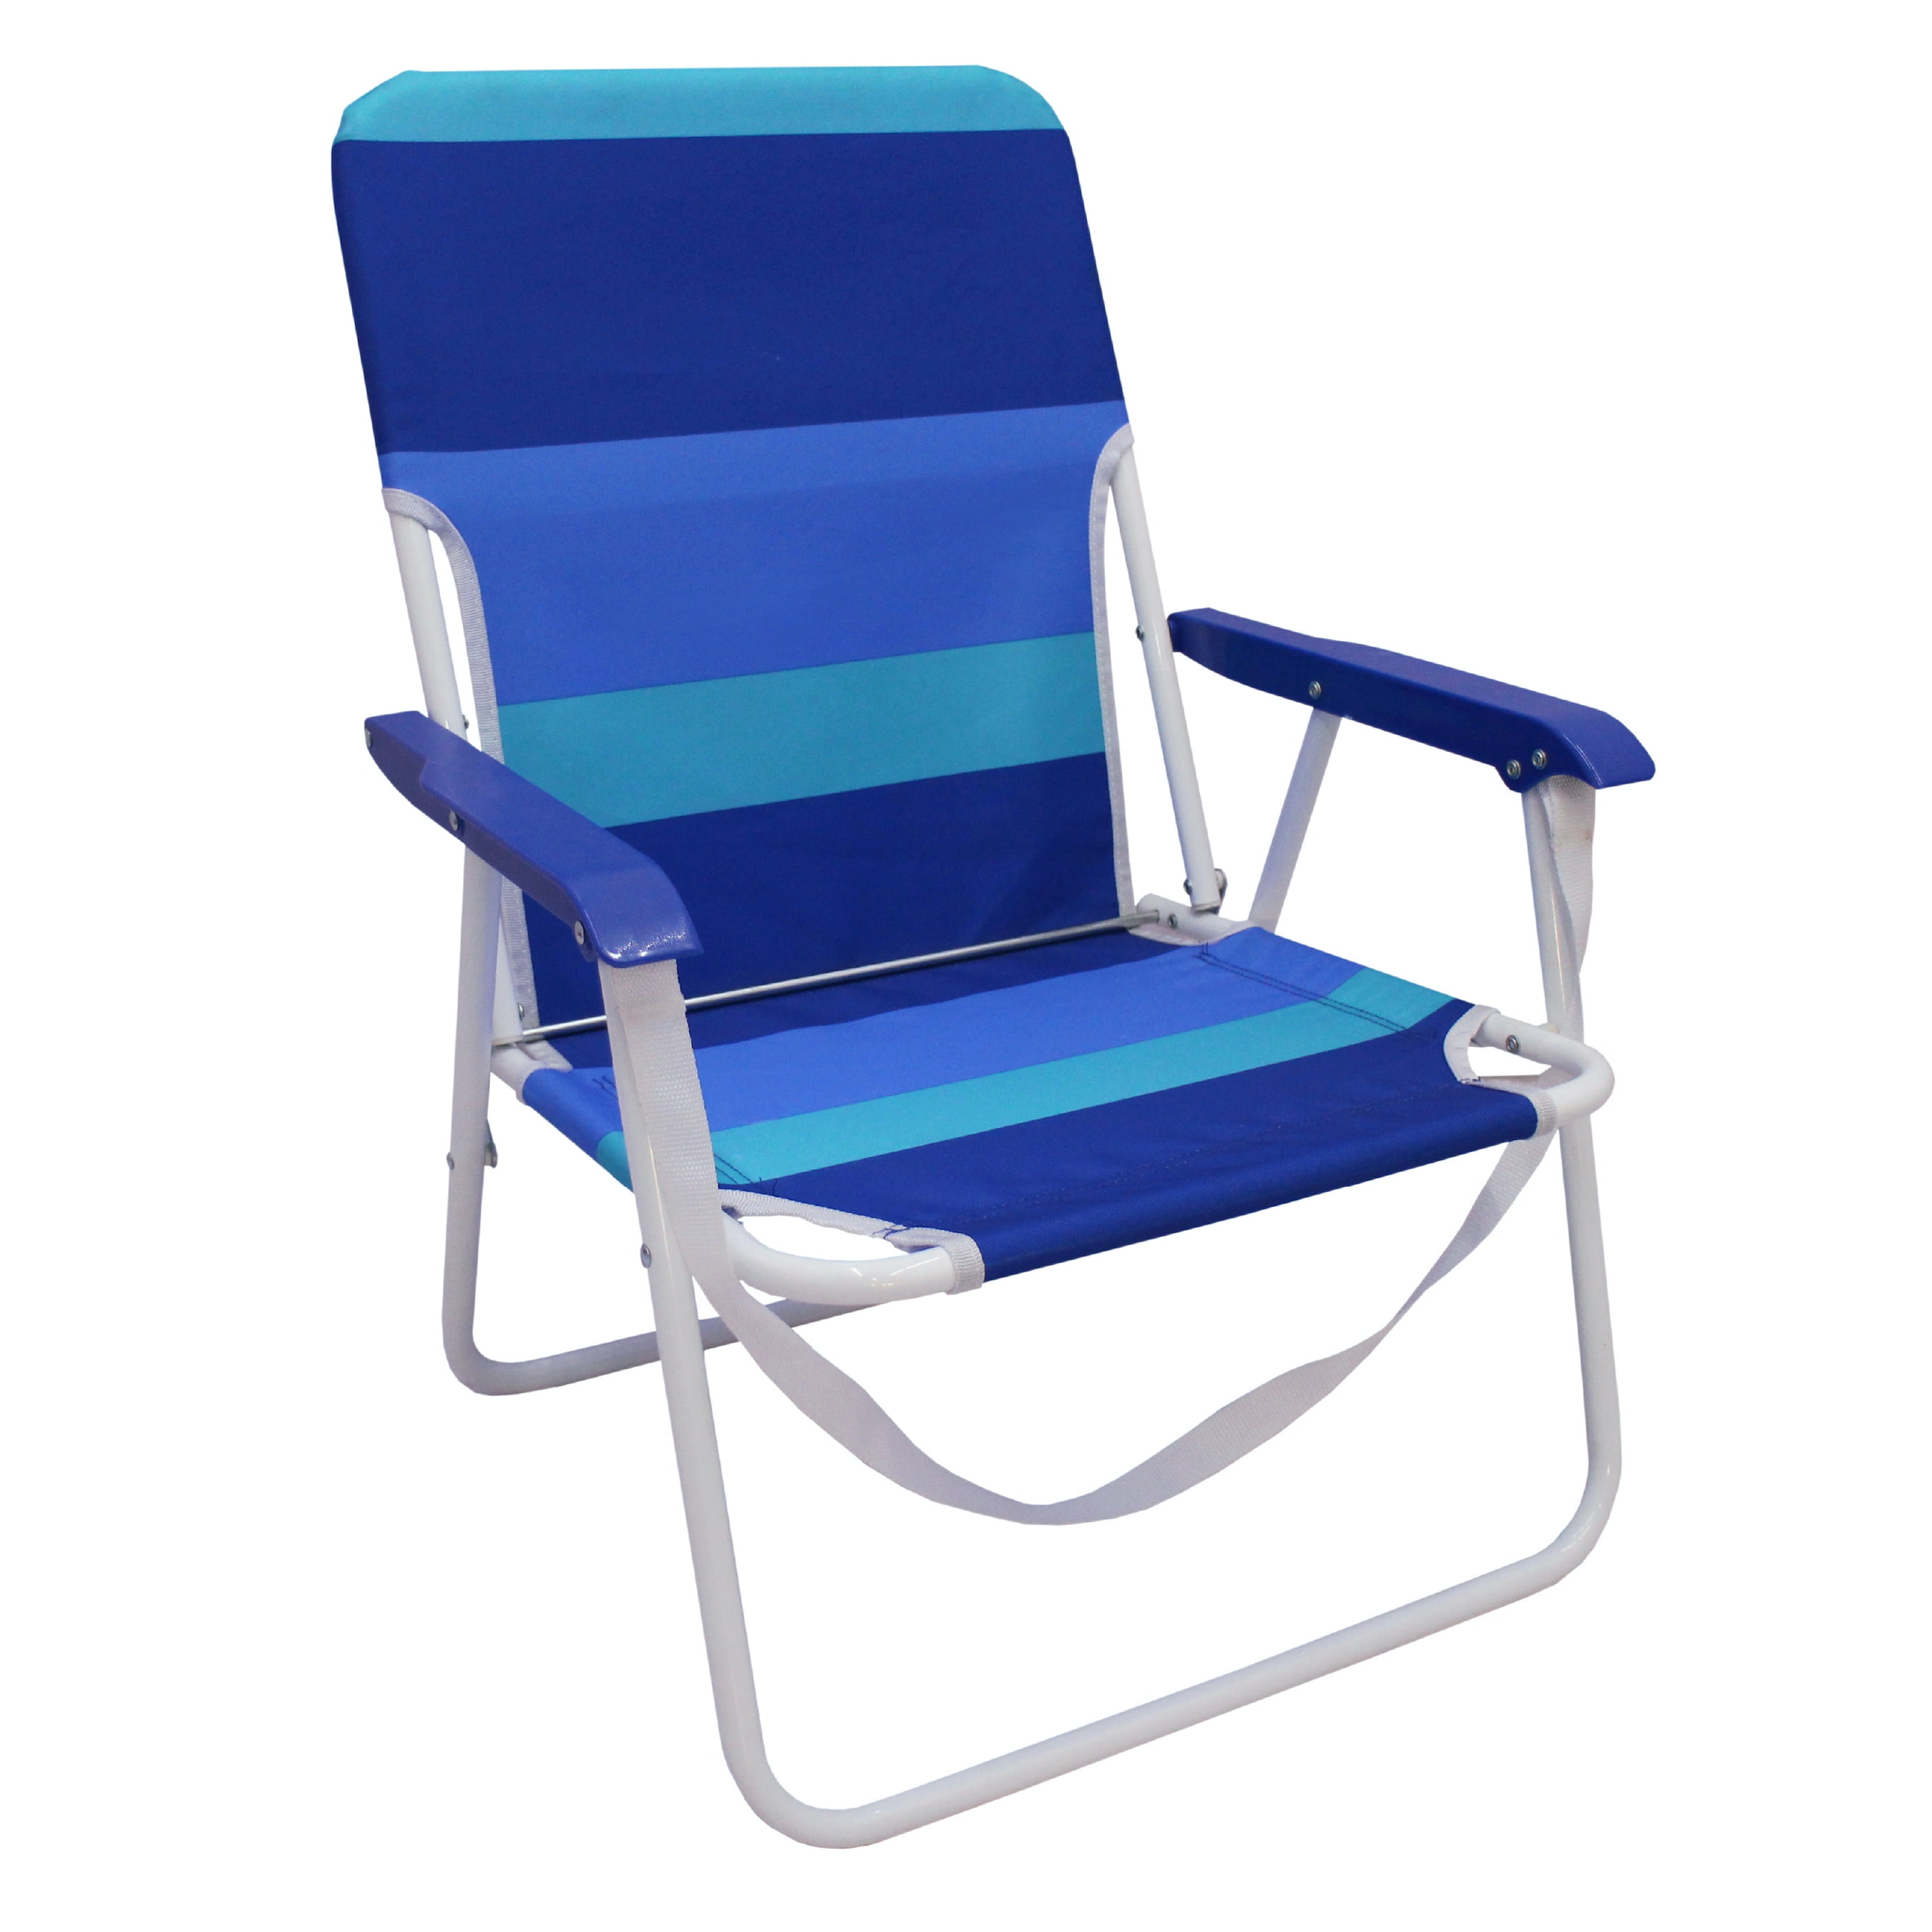 New Low Profile Folding Beach Chair with Simple Decor